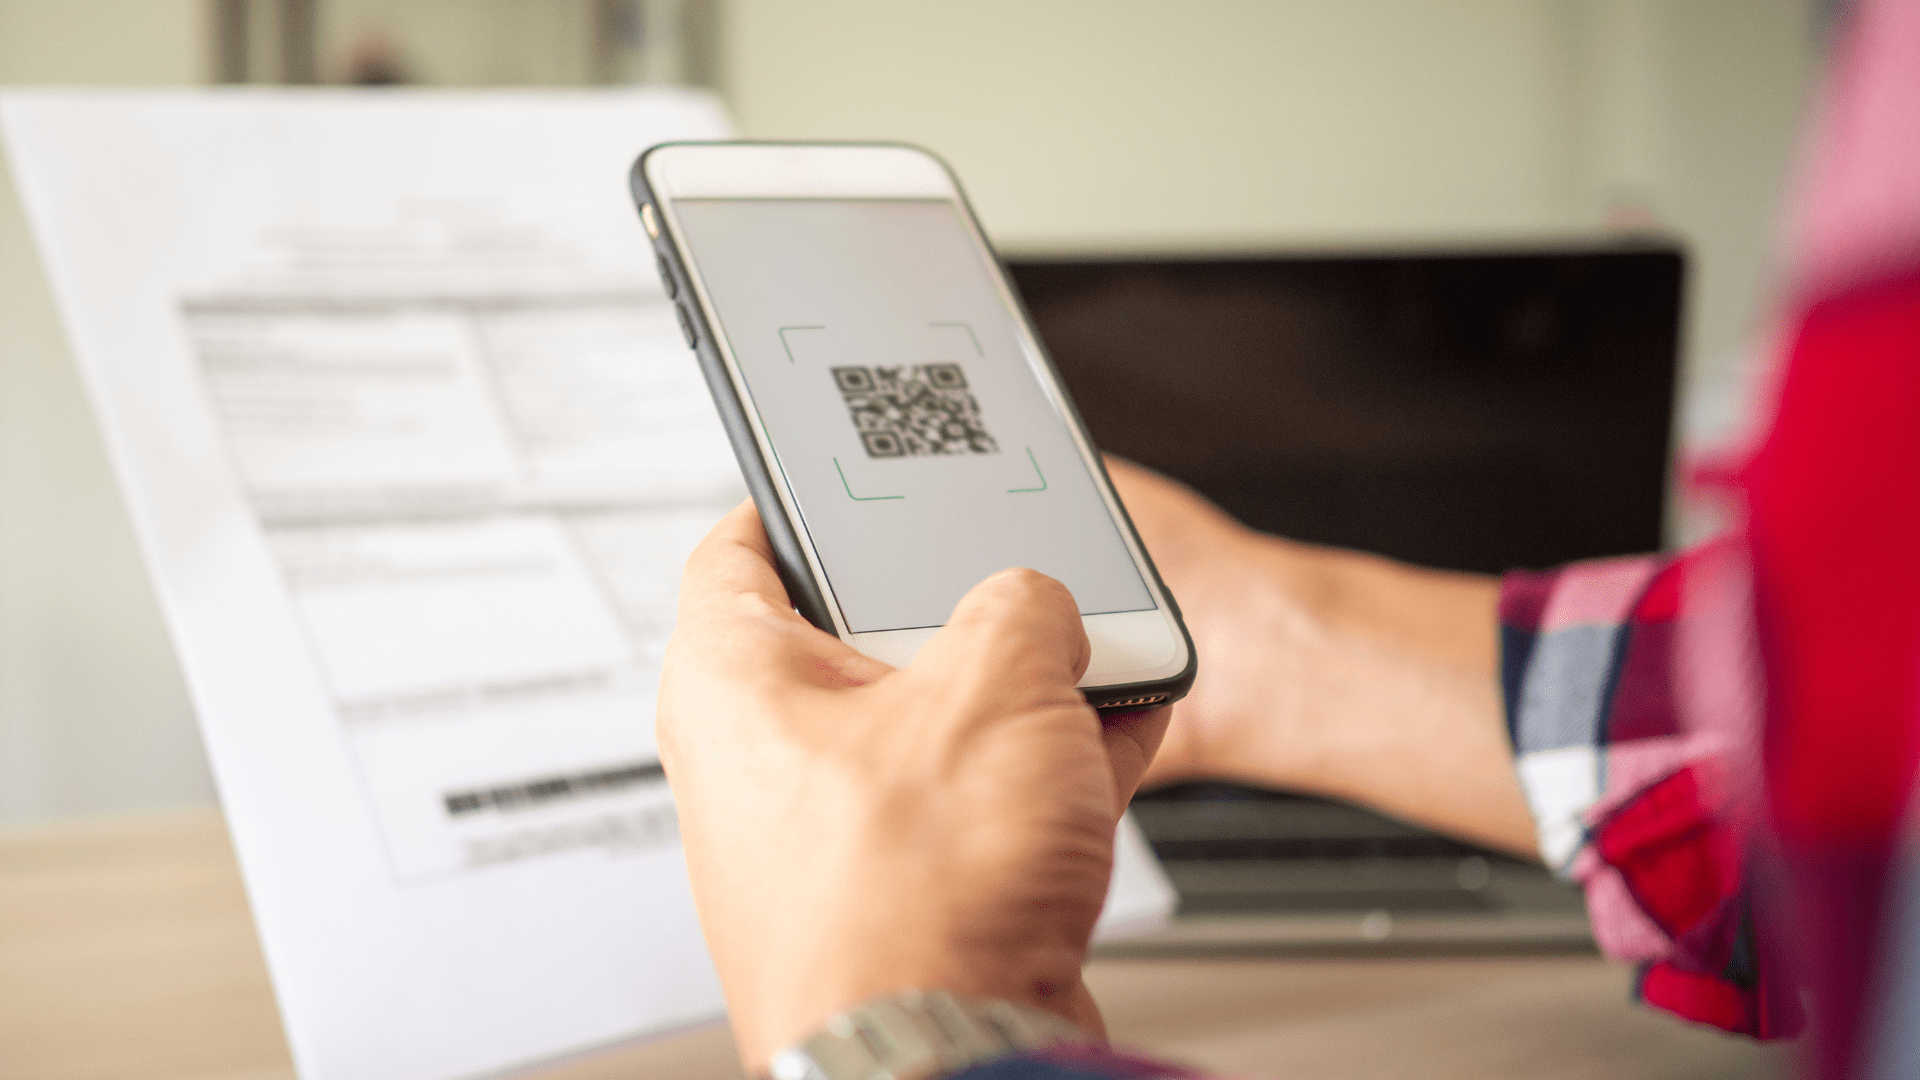 A person scanning a QR code on a letter